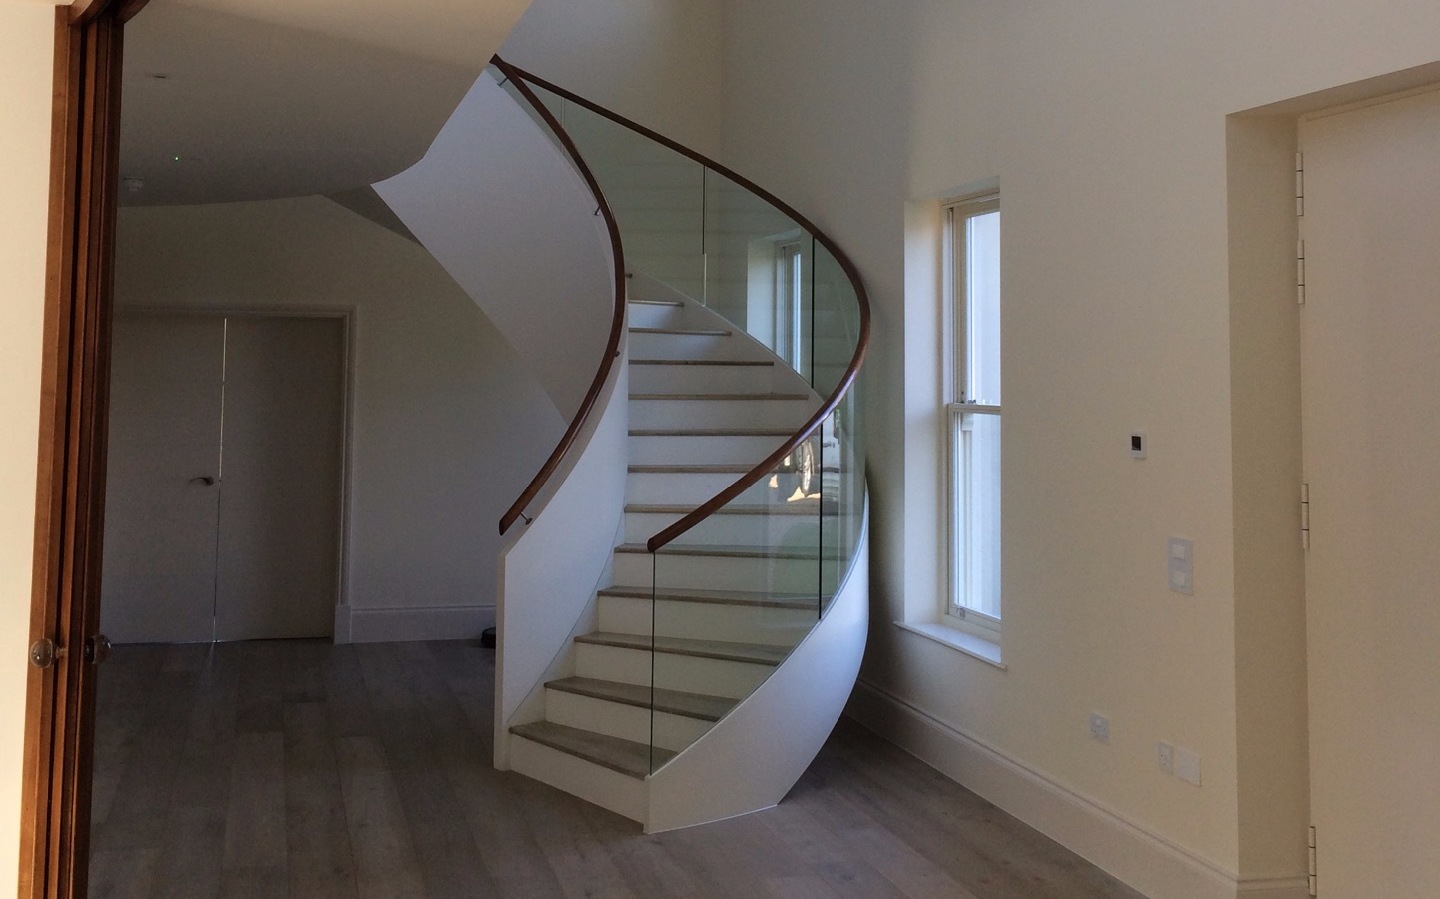 Kallisto curved stair finished with glass balustrade